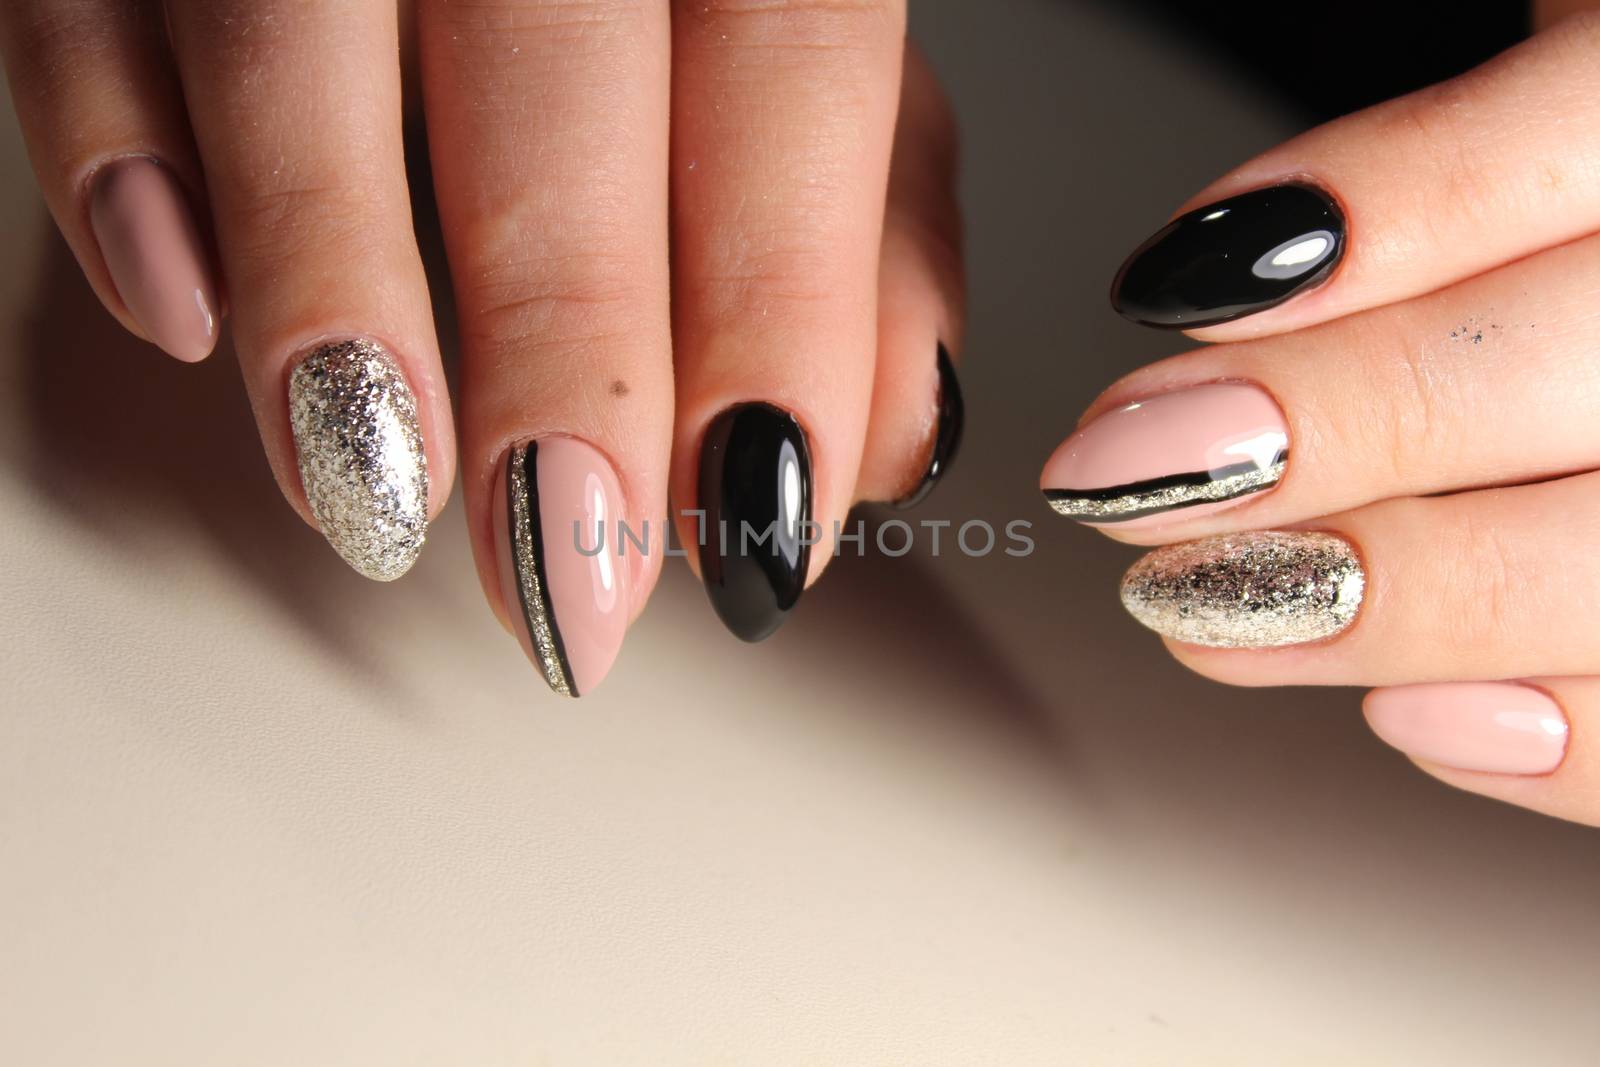 Best nails black and coffee color with abstraction